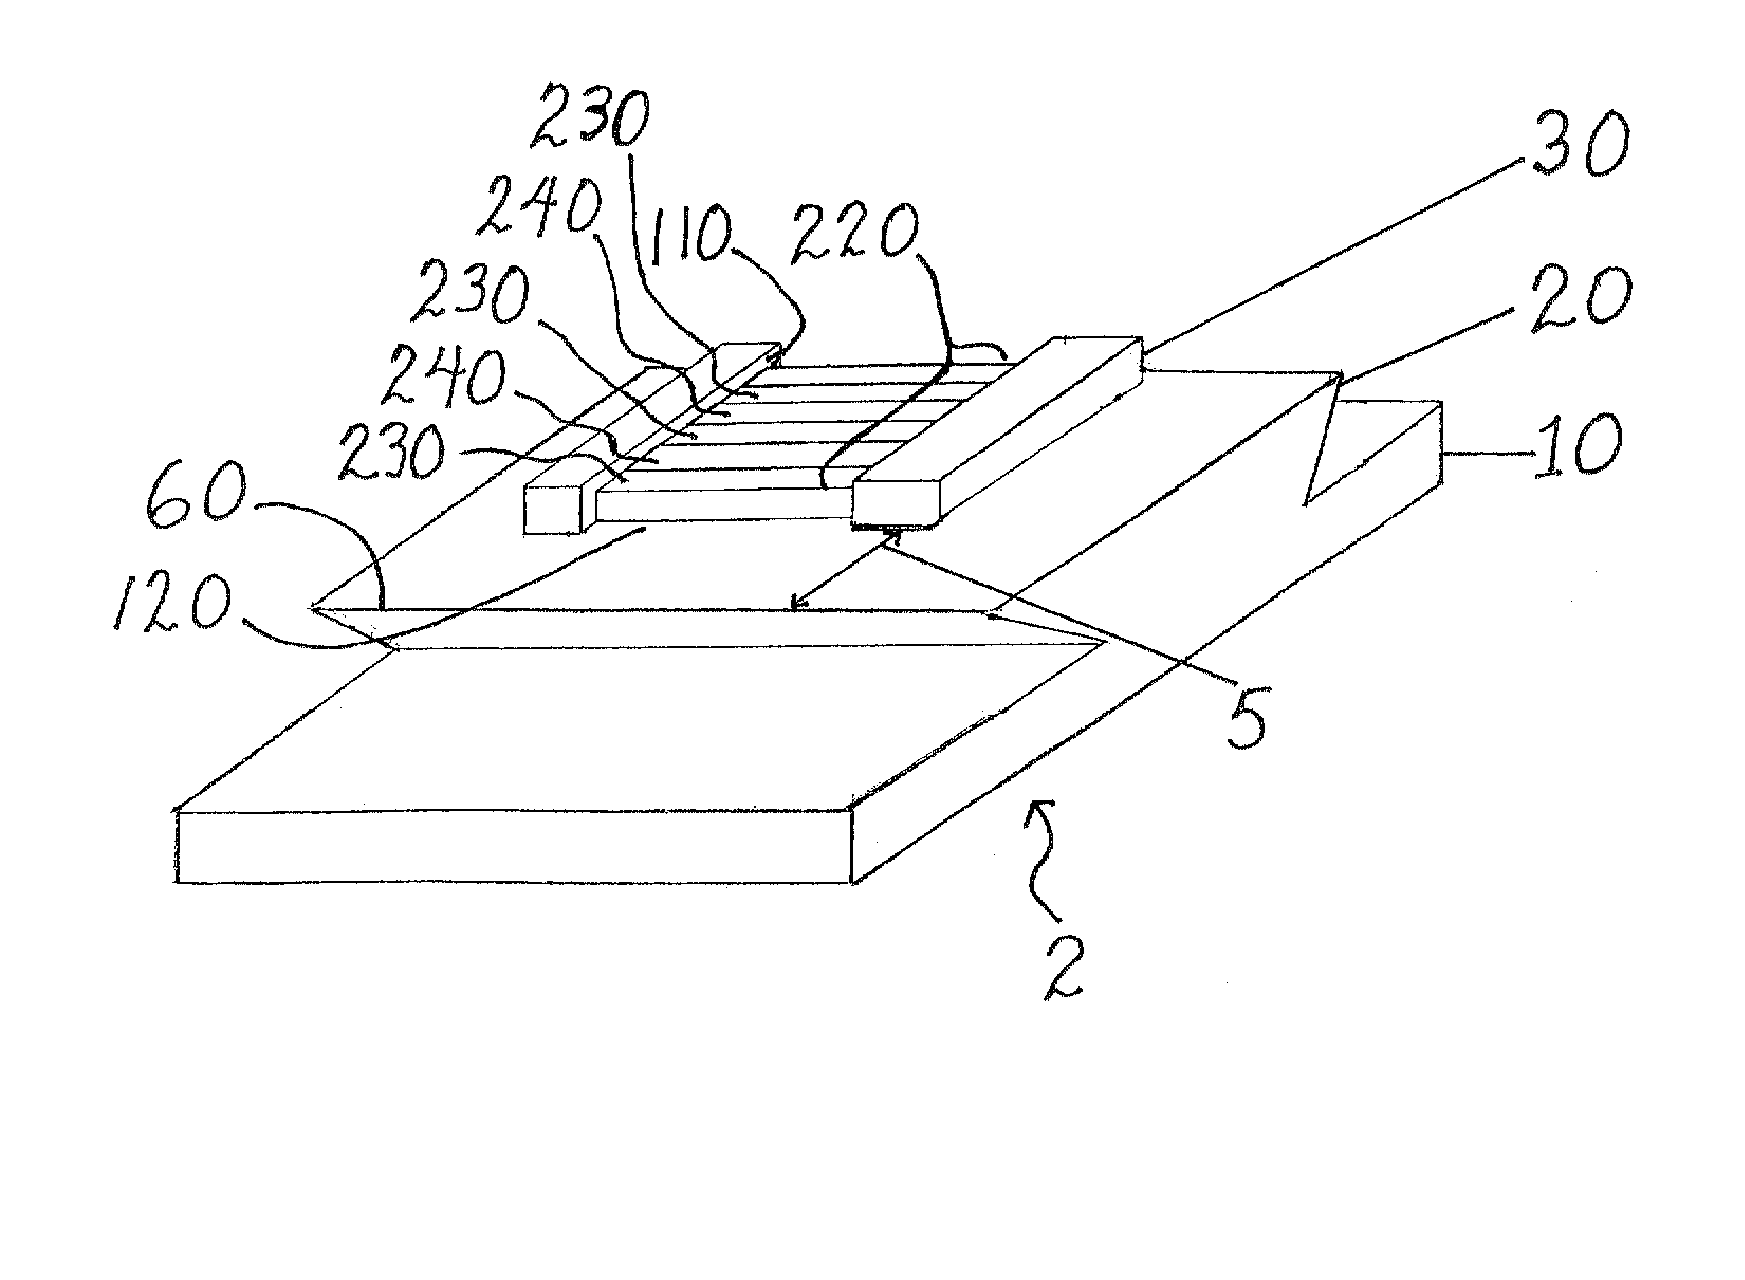 Method of positioning patterns from block copolymer self-assembly